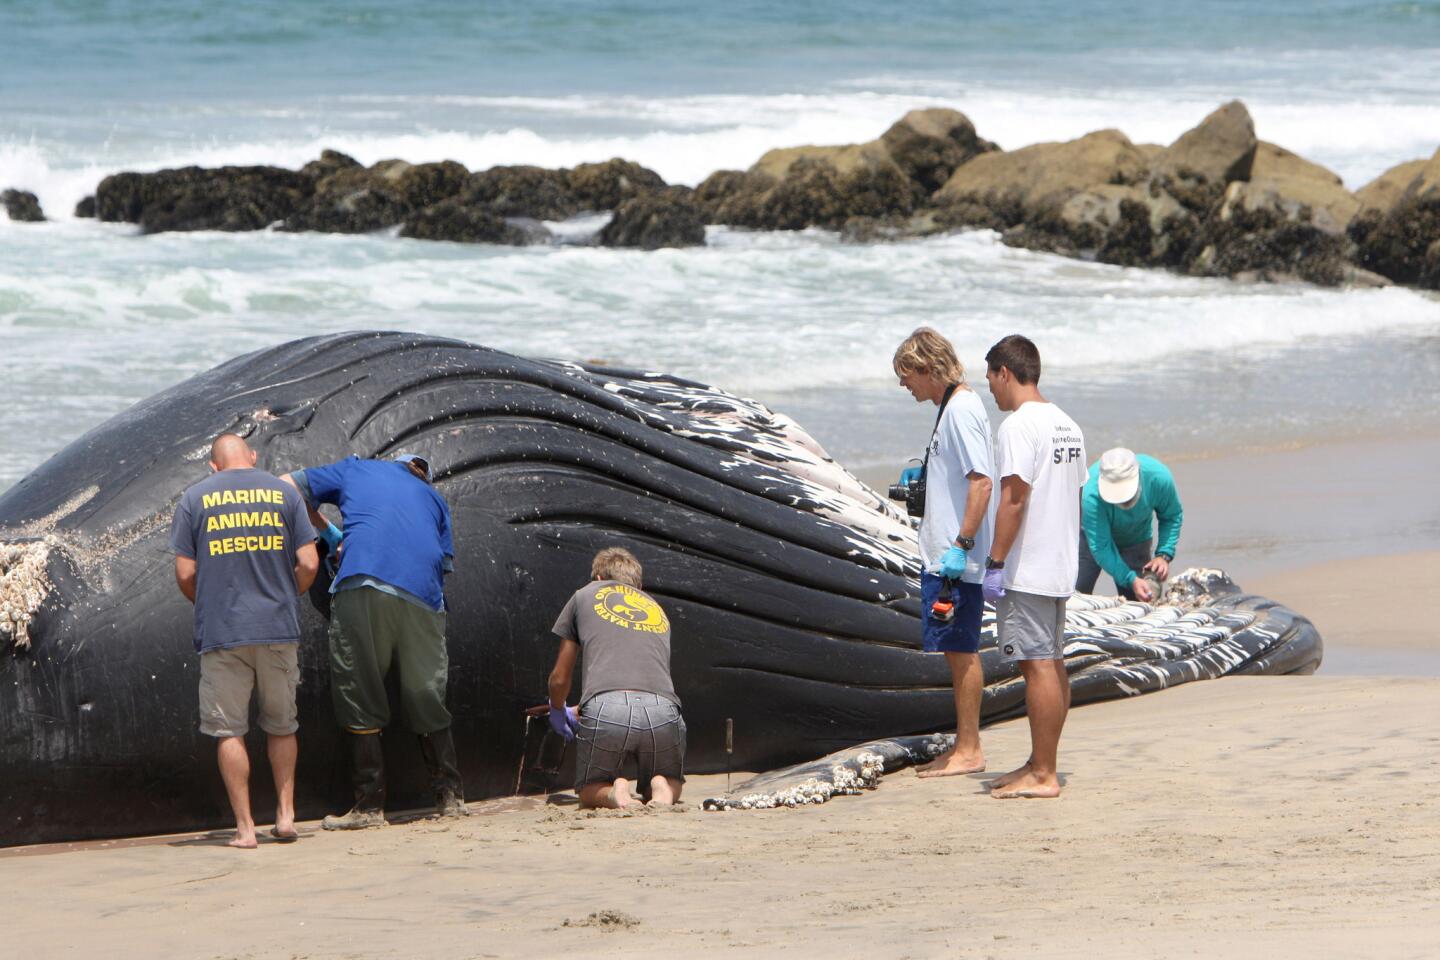 Photo Gallery: Dead Humpback whale washes up on shore at Dockweiler State Beach